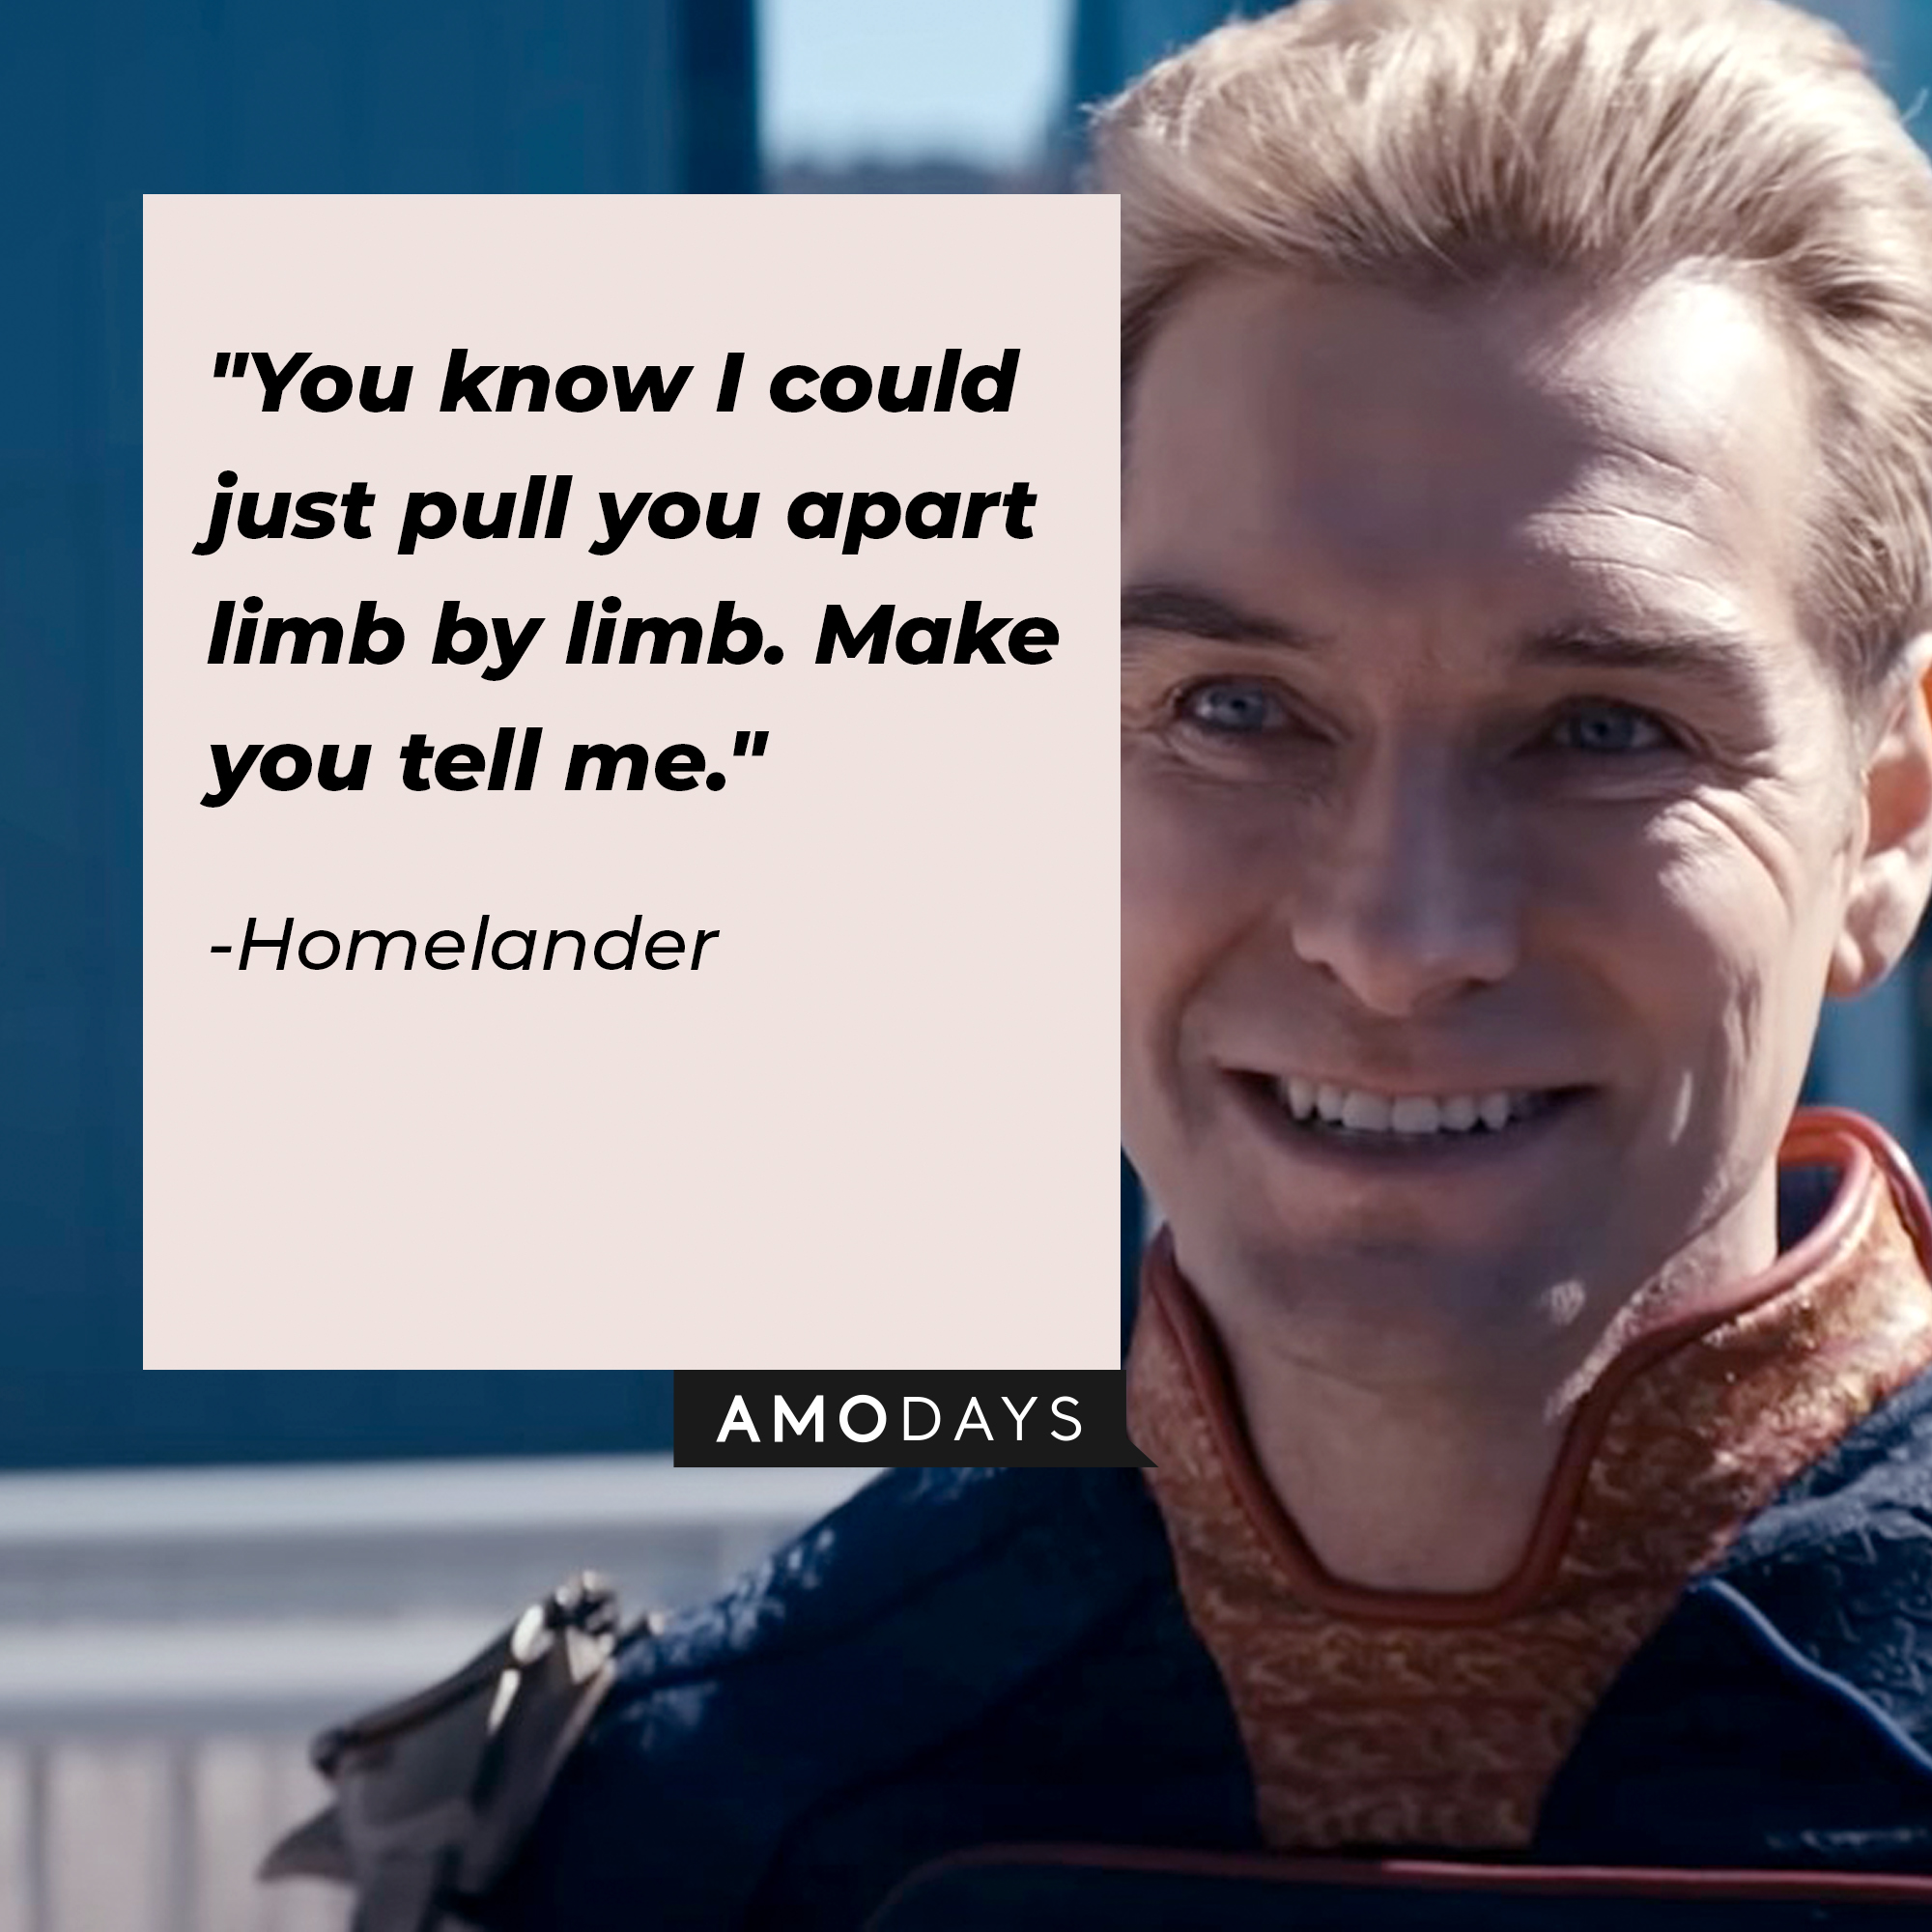 Homelander's quote: "You know I could just pull you apart limb by limb. Make you tell me." | Source: Facebook.com/TheBoysTV